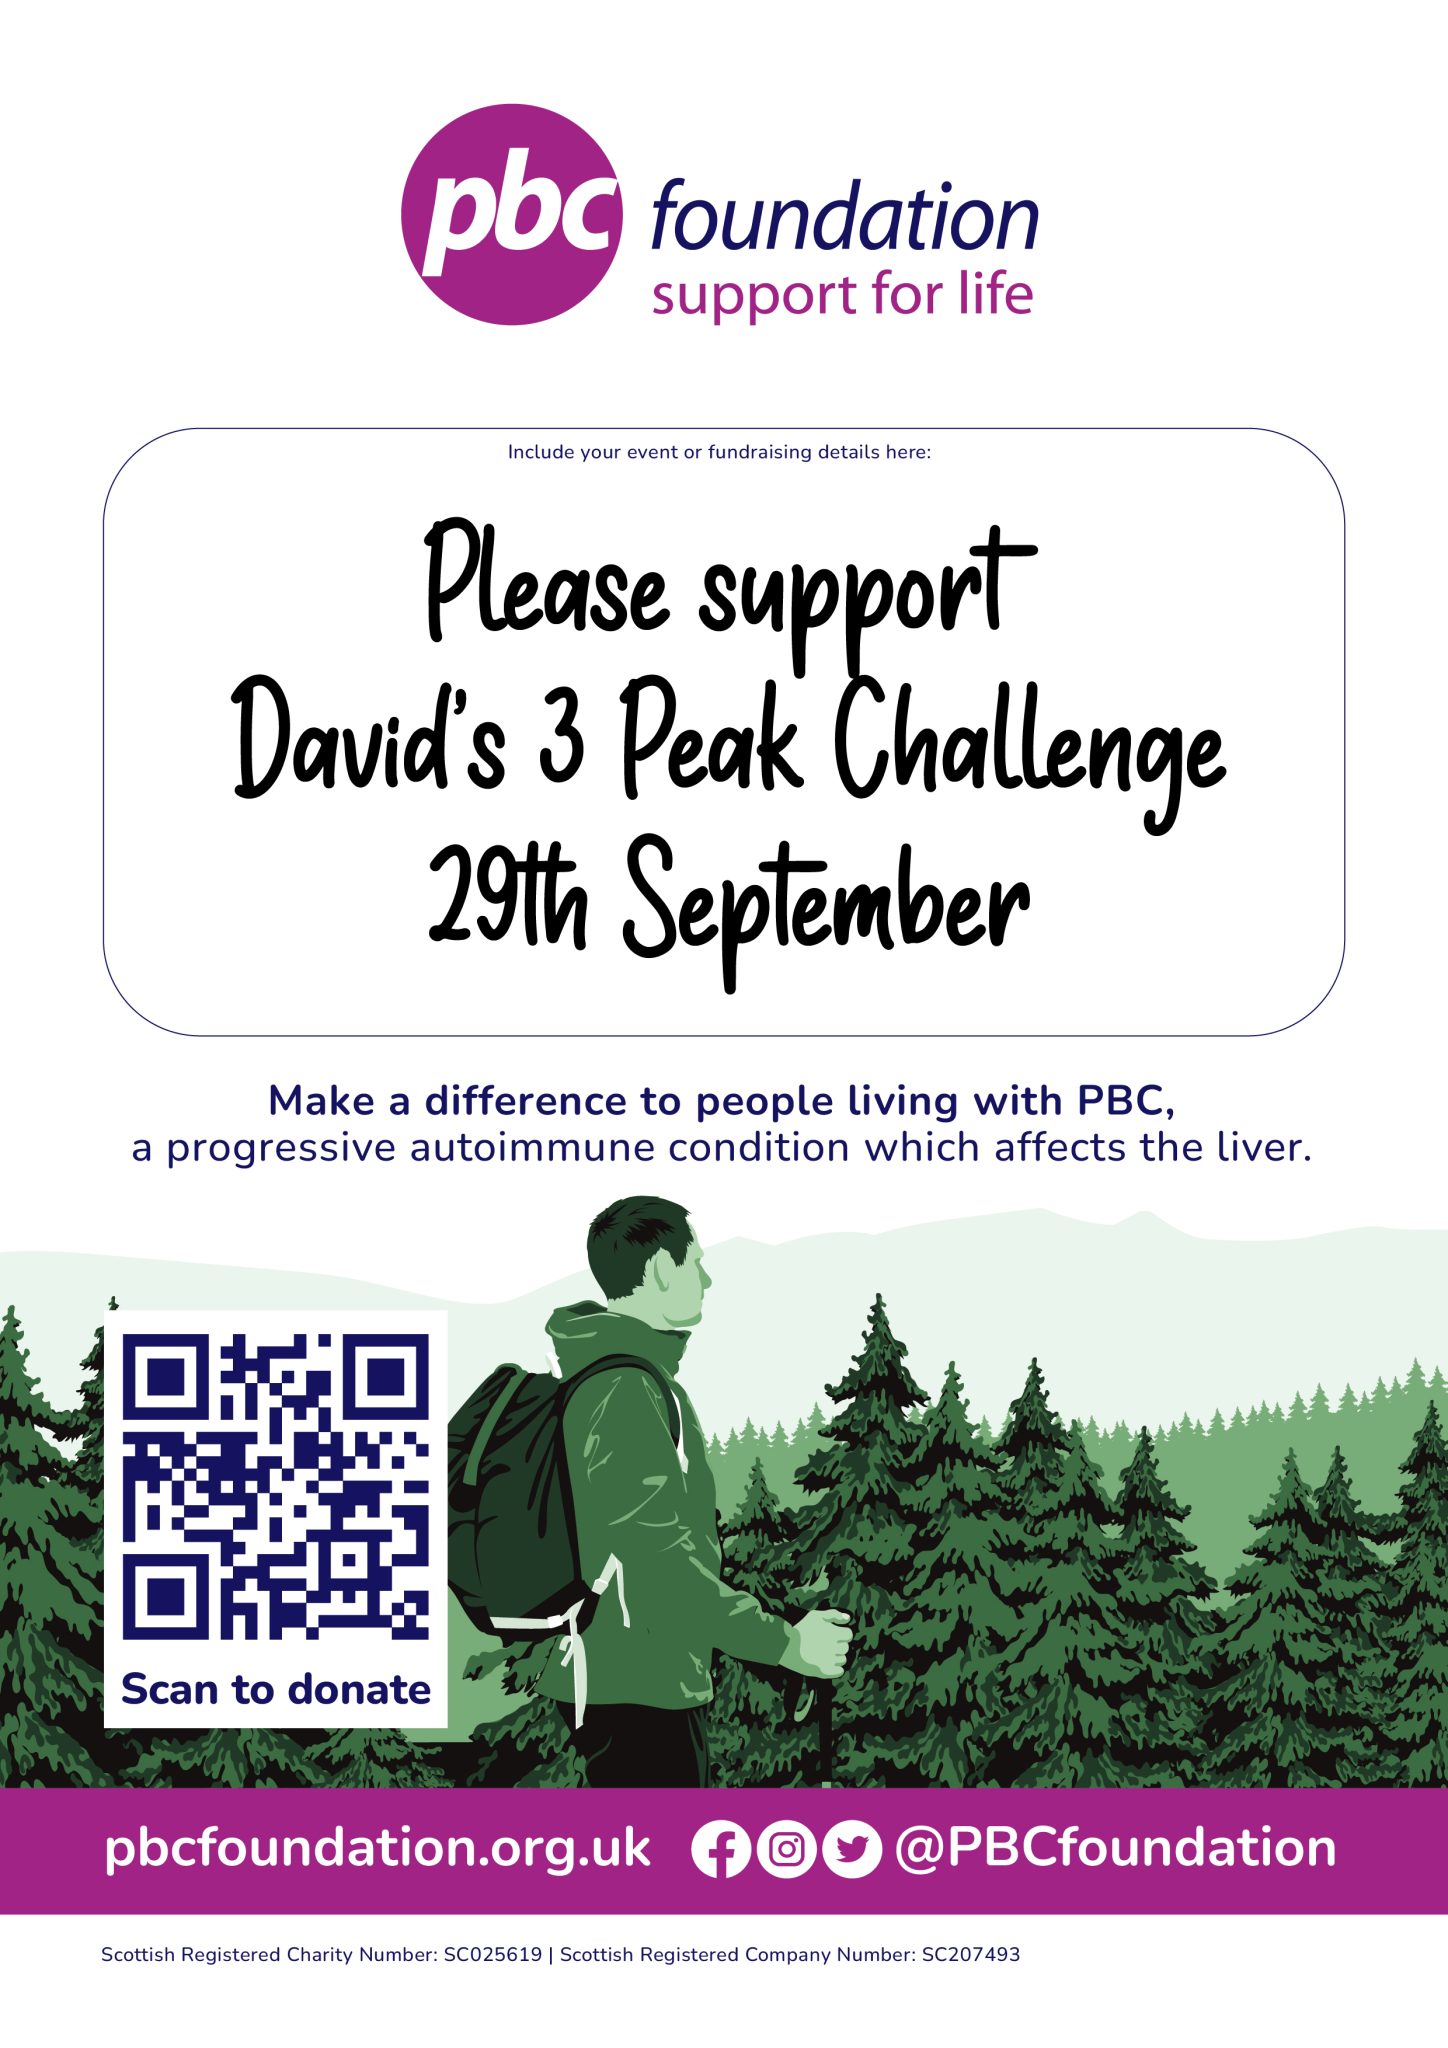 A poster that can be personalised to promote an event. It includes an image of a man hiking in the mountains. The example text says Please support David's 3 Peak Challenge, 29th September.